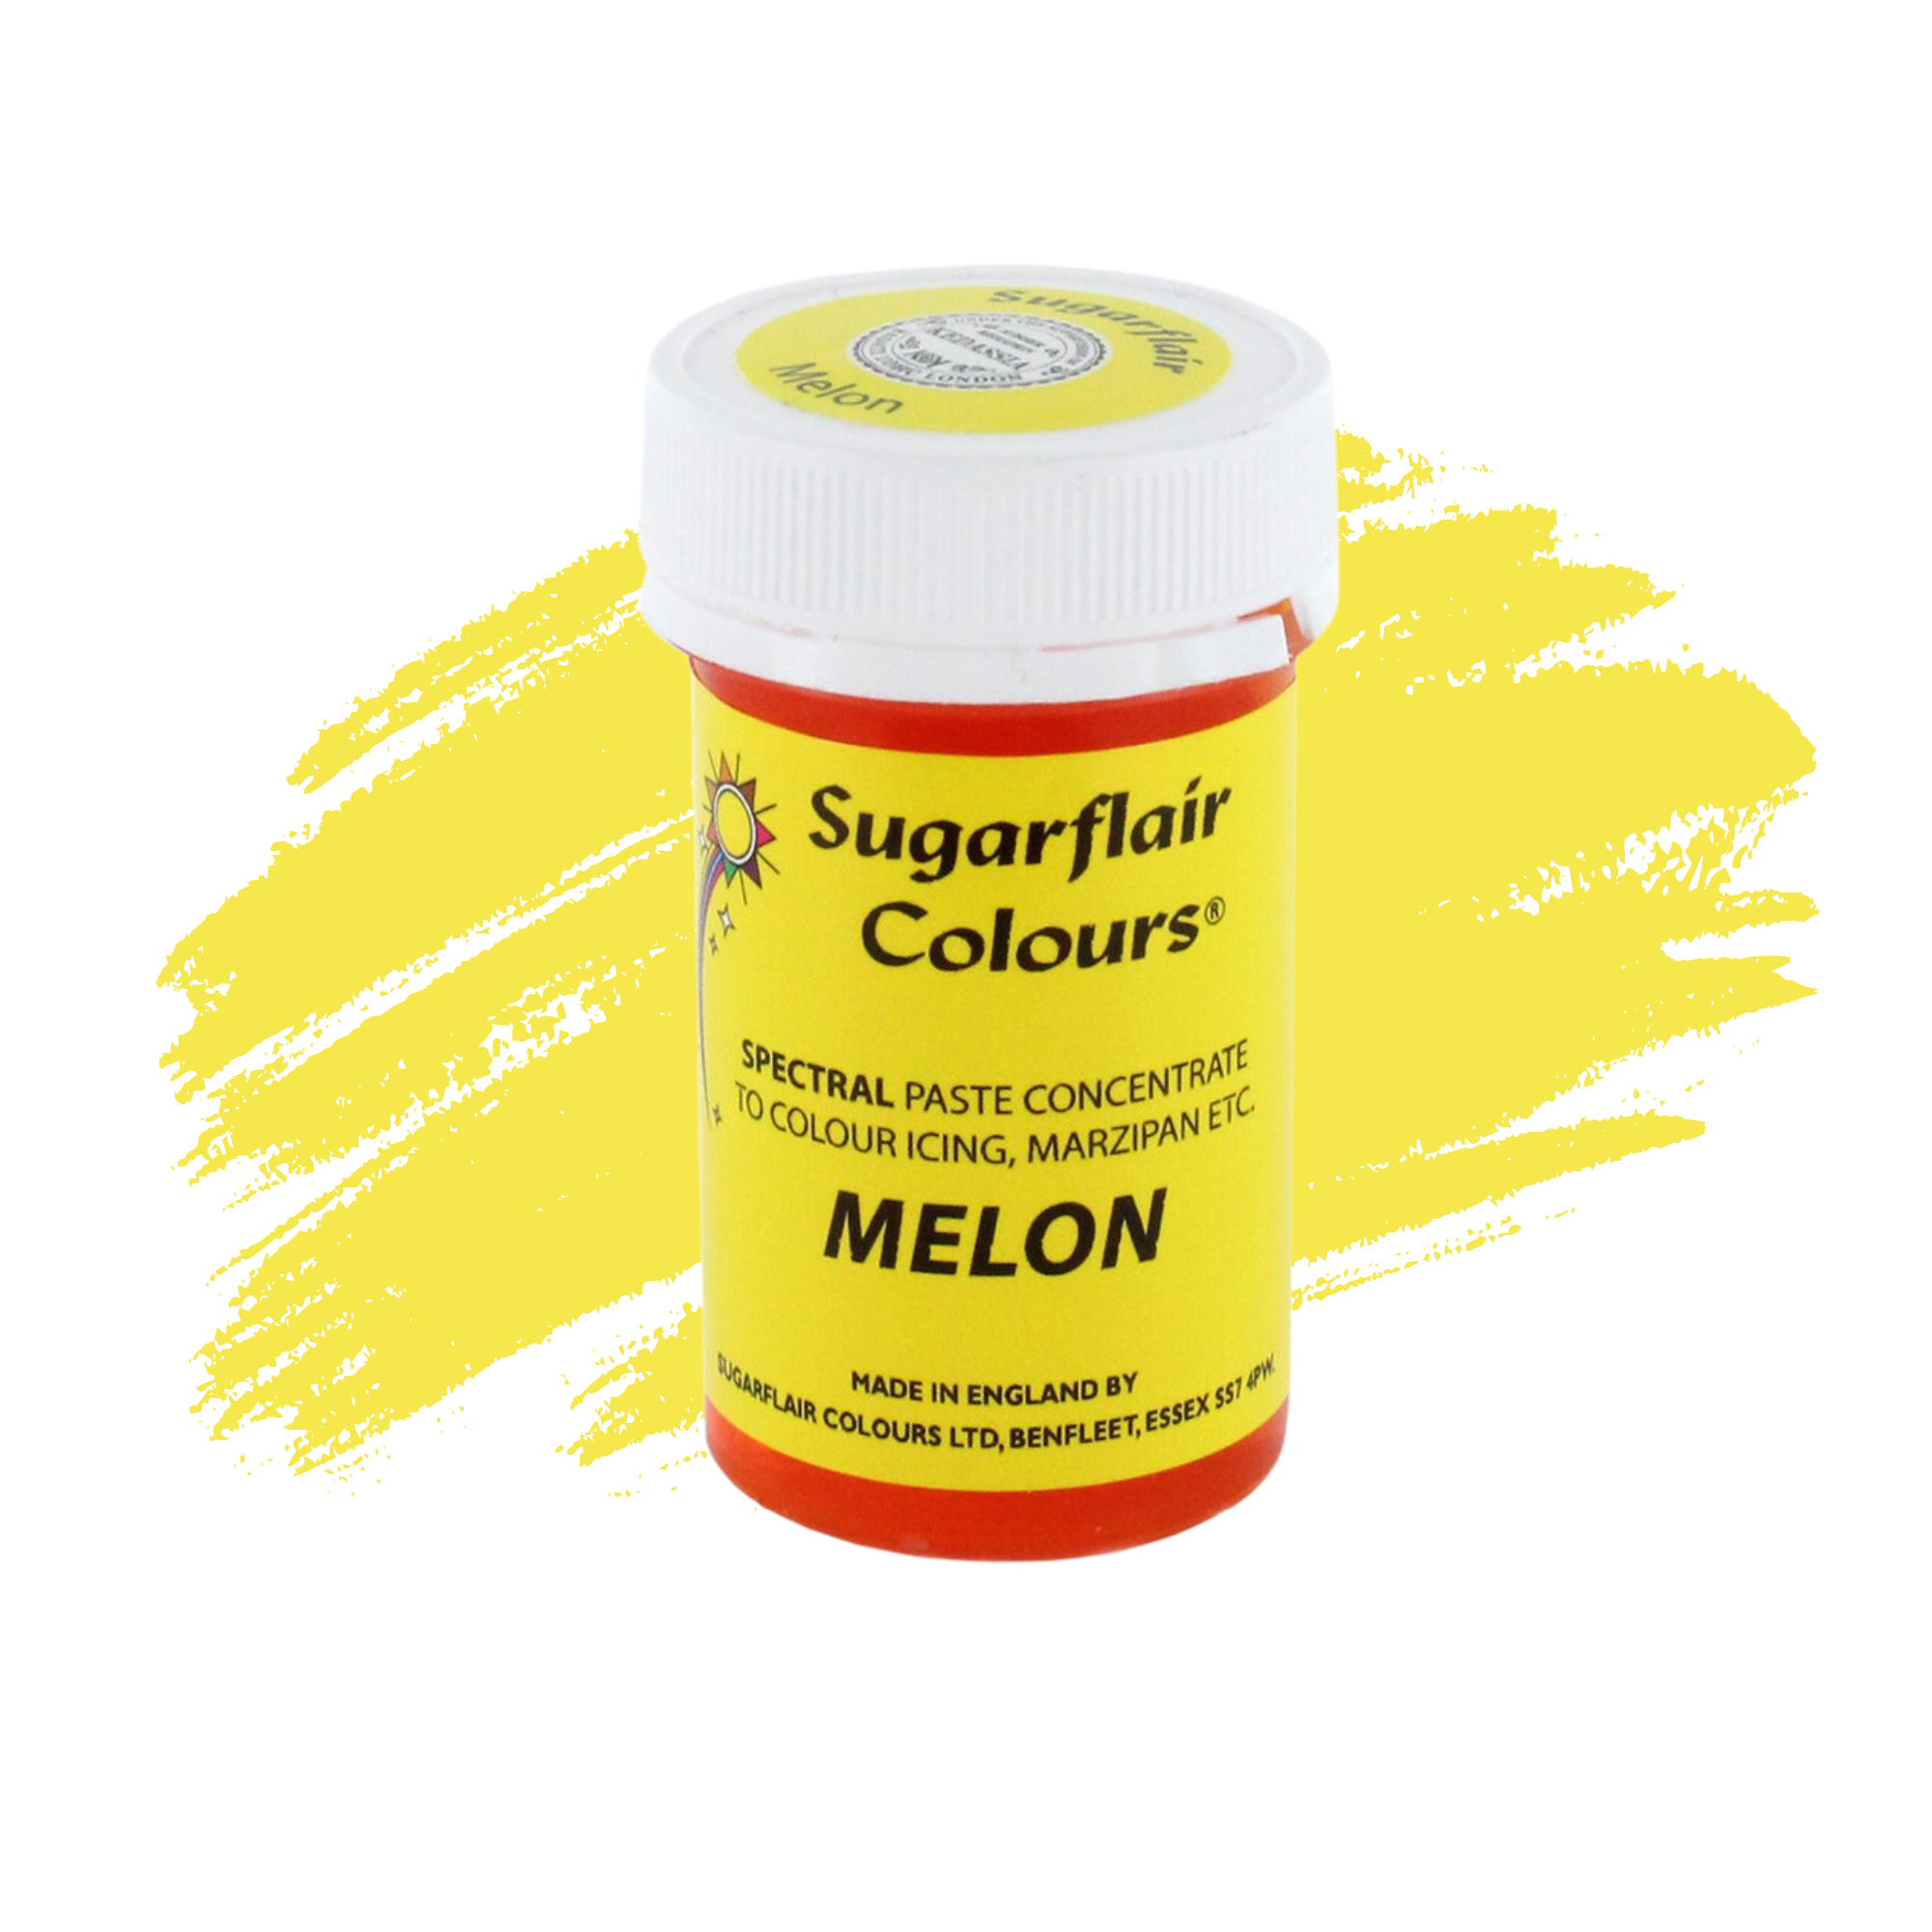 Sugarflair Paste Colours Concentrated Food Colouring - Spectral Melon Yellow - 25g